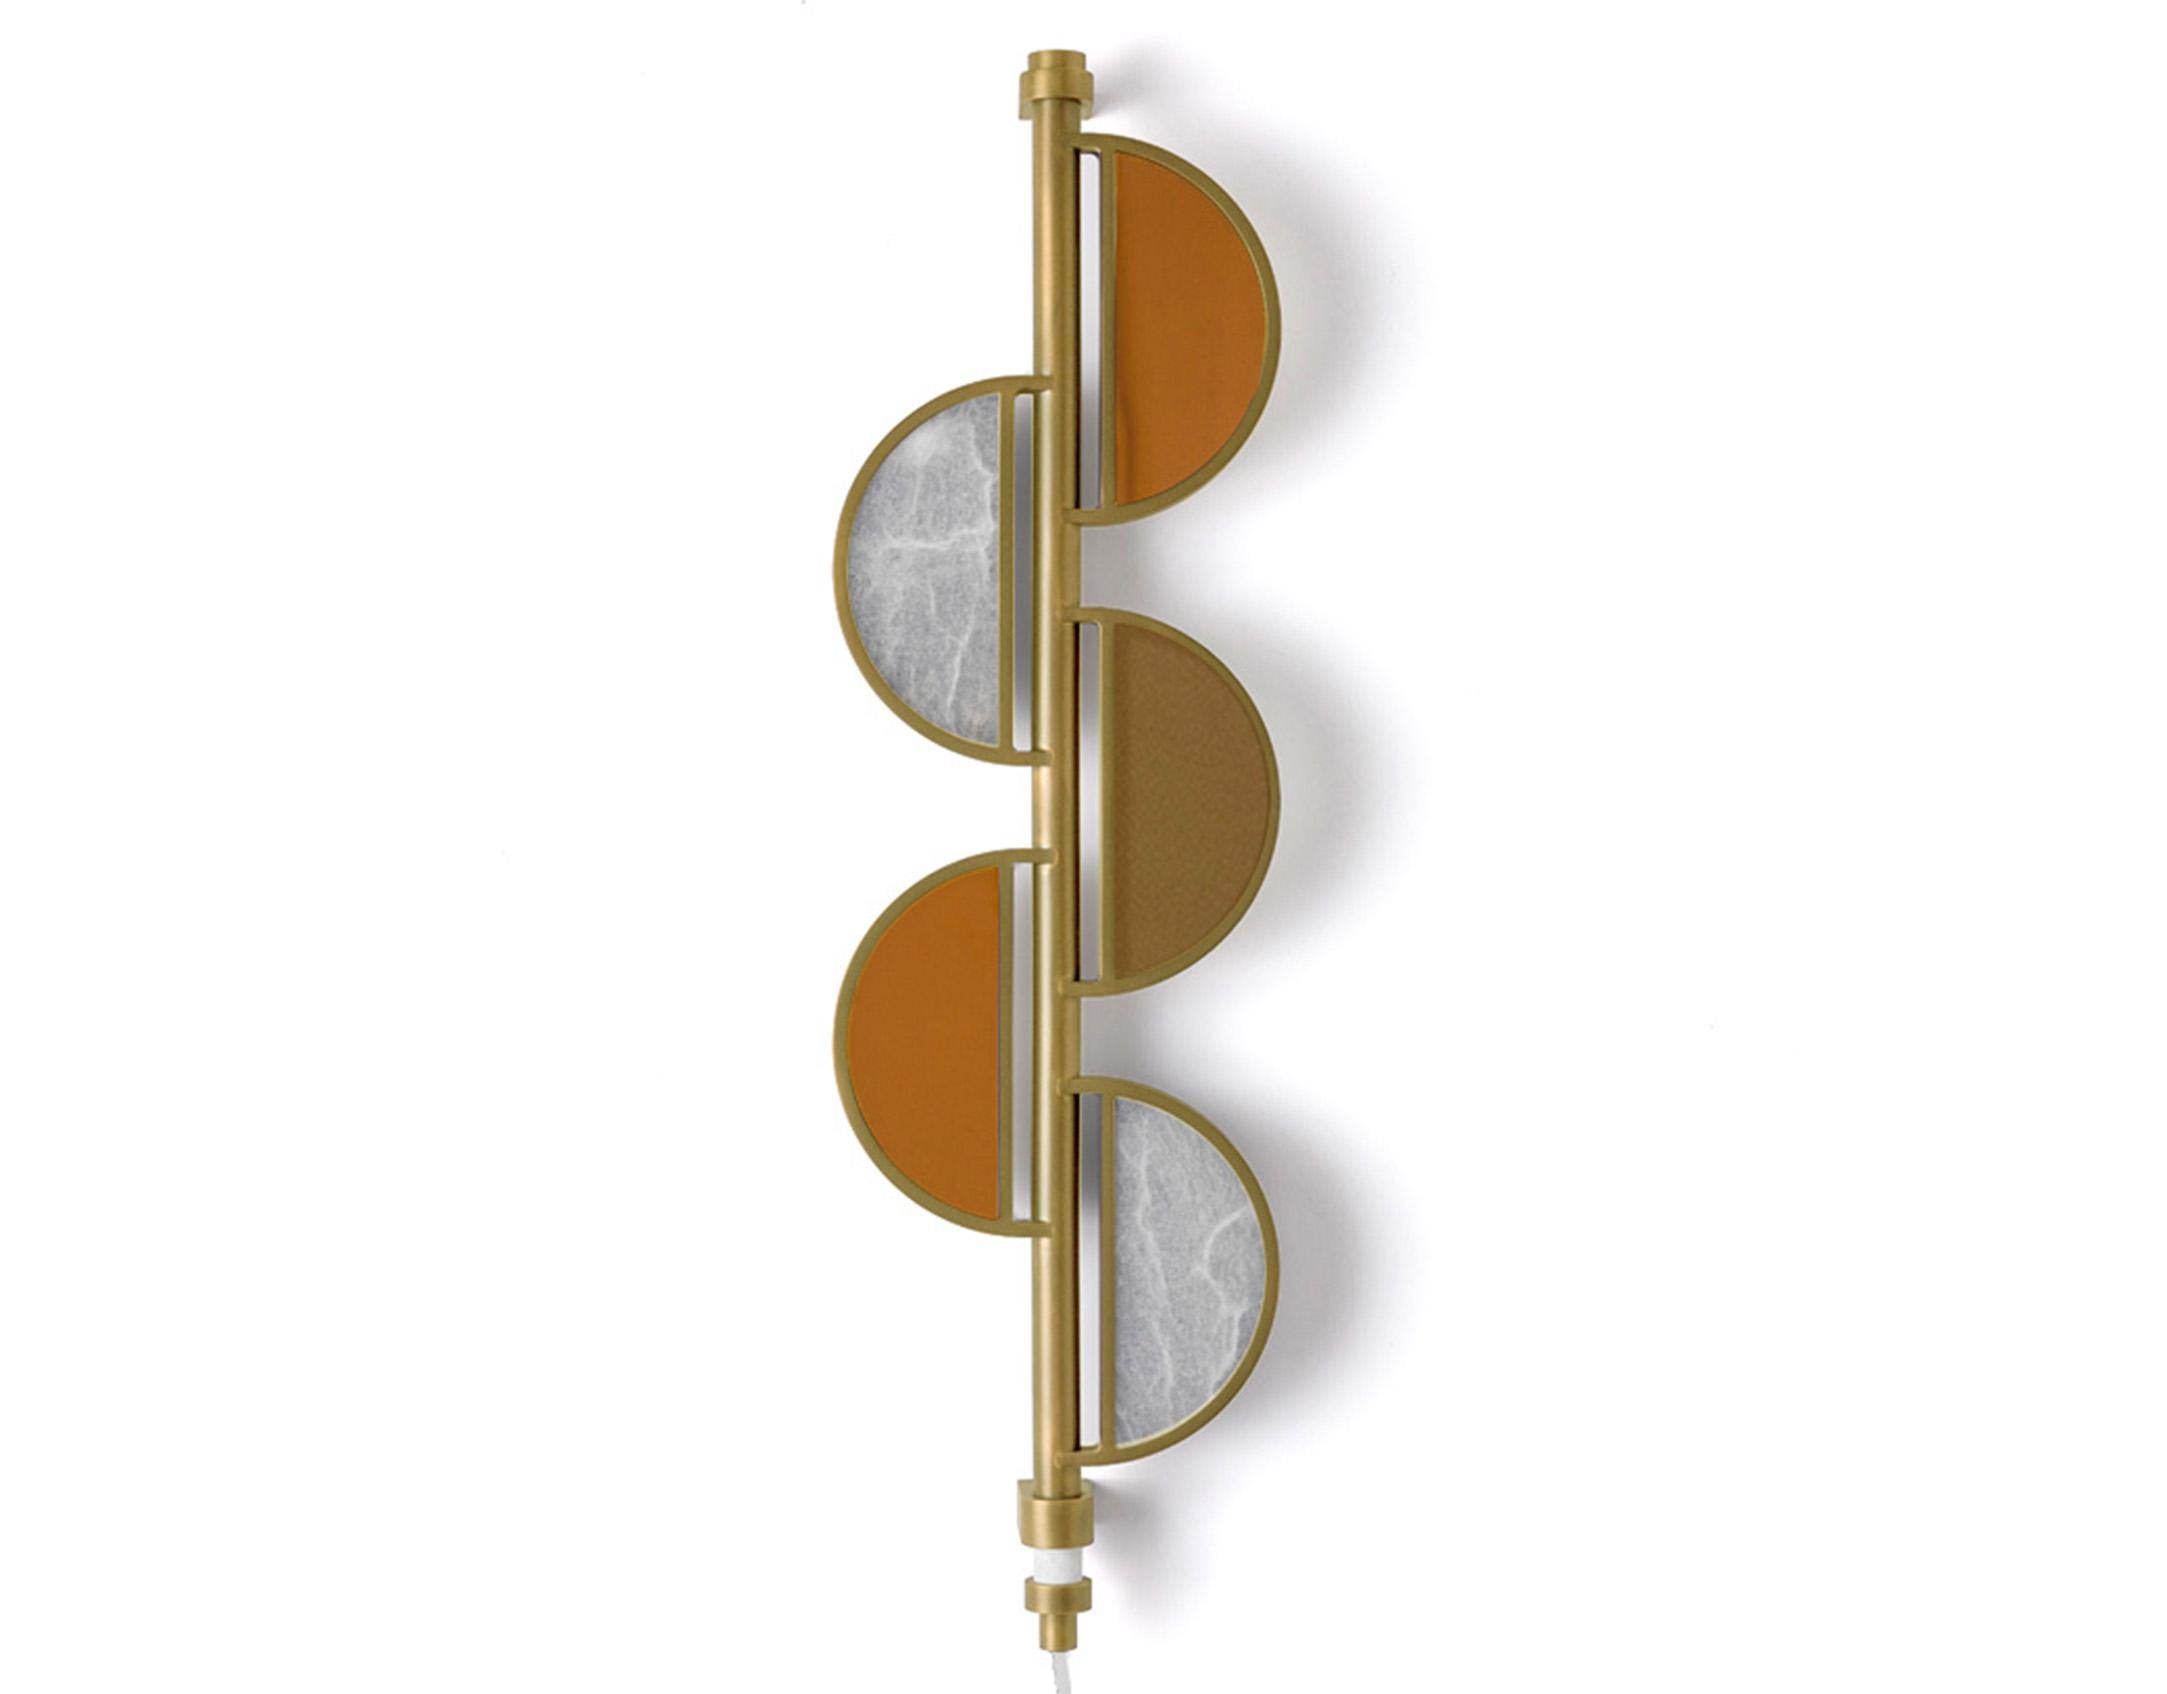 A beguiling bench-made fixture, oil-rubbed brass frames a quintet of hemispheric panes—sunset bronze-glass, iridescent alabaster, and smoke-mirror glass. Further setting this sconce apart is the gorgeous materiality of the hand-worked metal, its